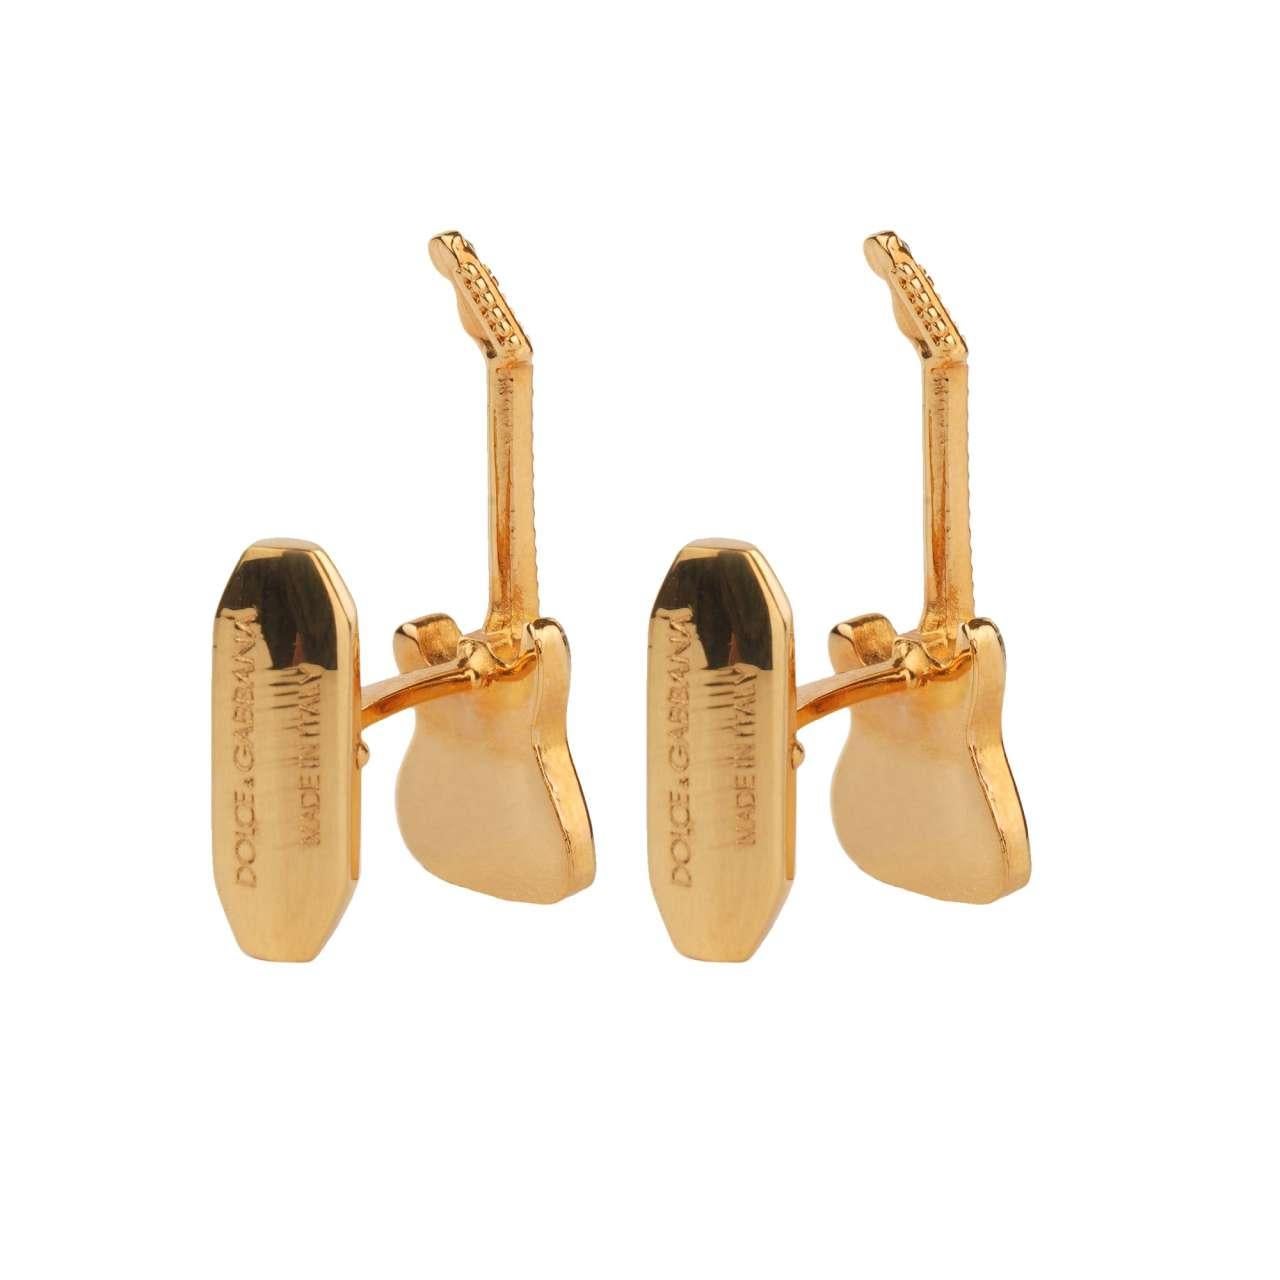 - Guitar Cufflinks in gold galvanized metal with blue enamel by DOLCE & GABBANA - New with Box - MADE IN ITALY - Former RRP: EUR 245 - Engraved Dolce&Gabbana Logo - Nickel free - Blue enamel - Model: WFJ3S8-W0001-87655 - Material: 80% Brass, 20%